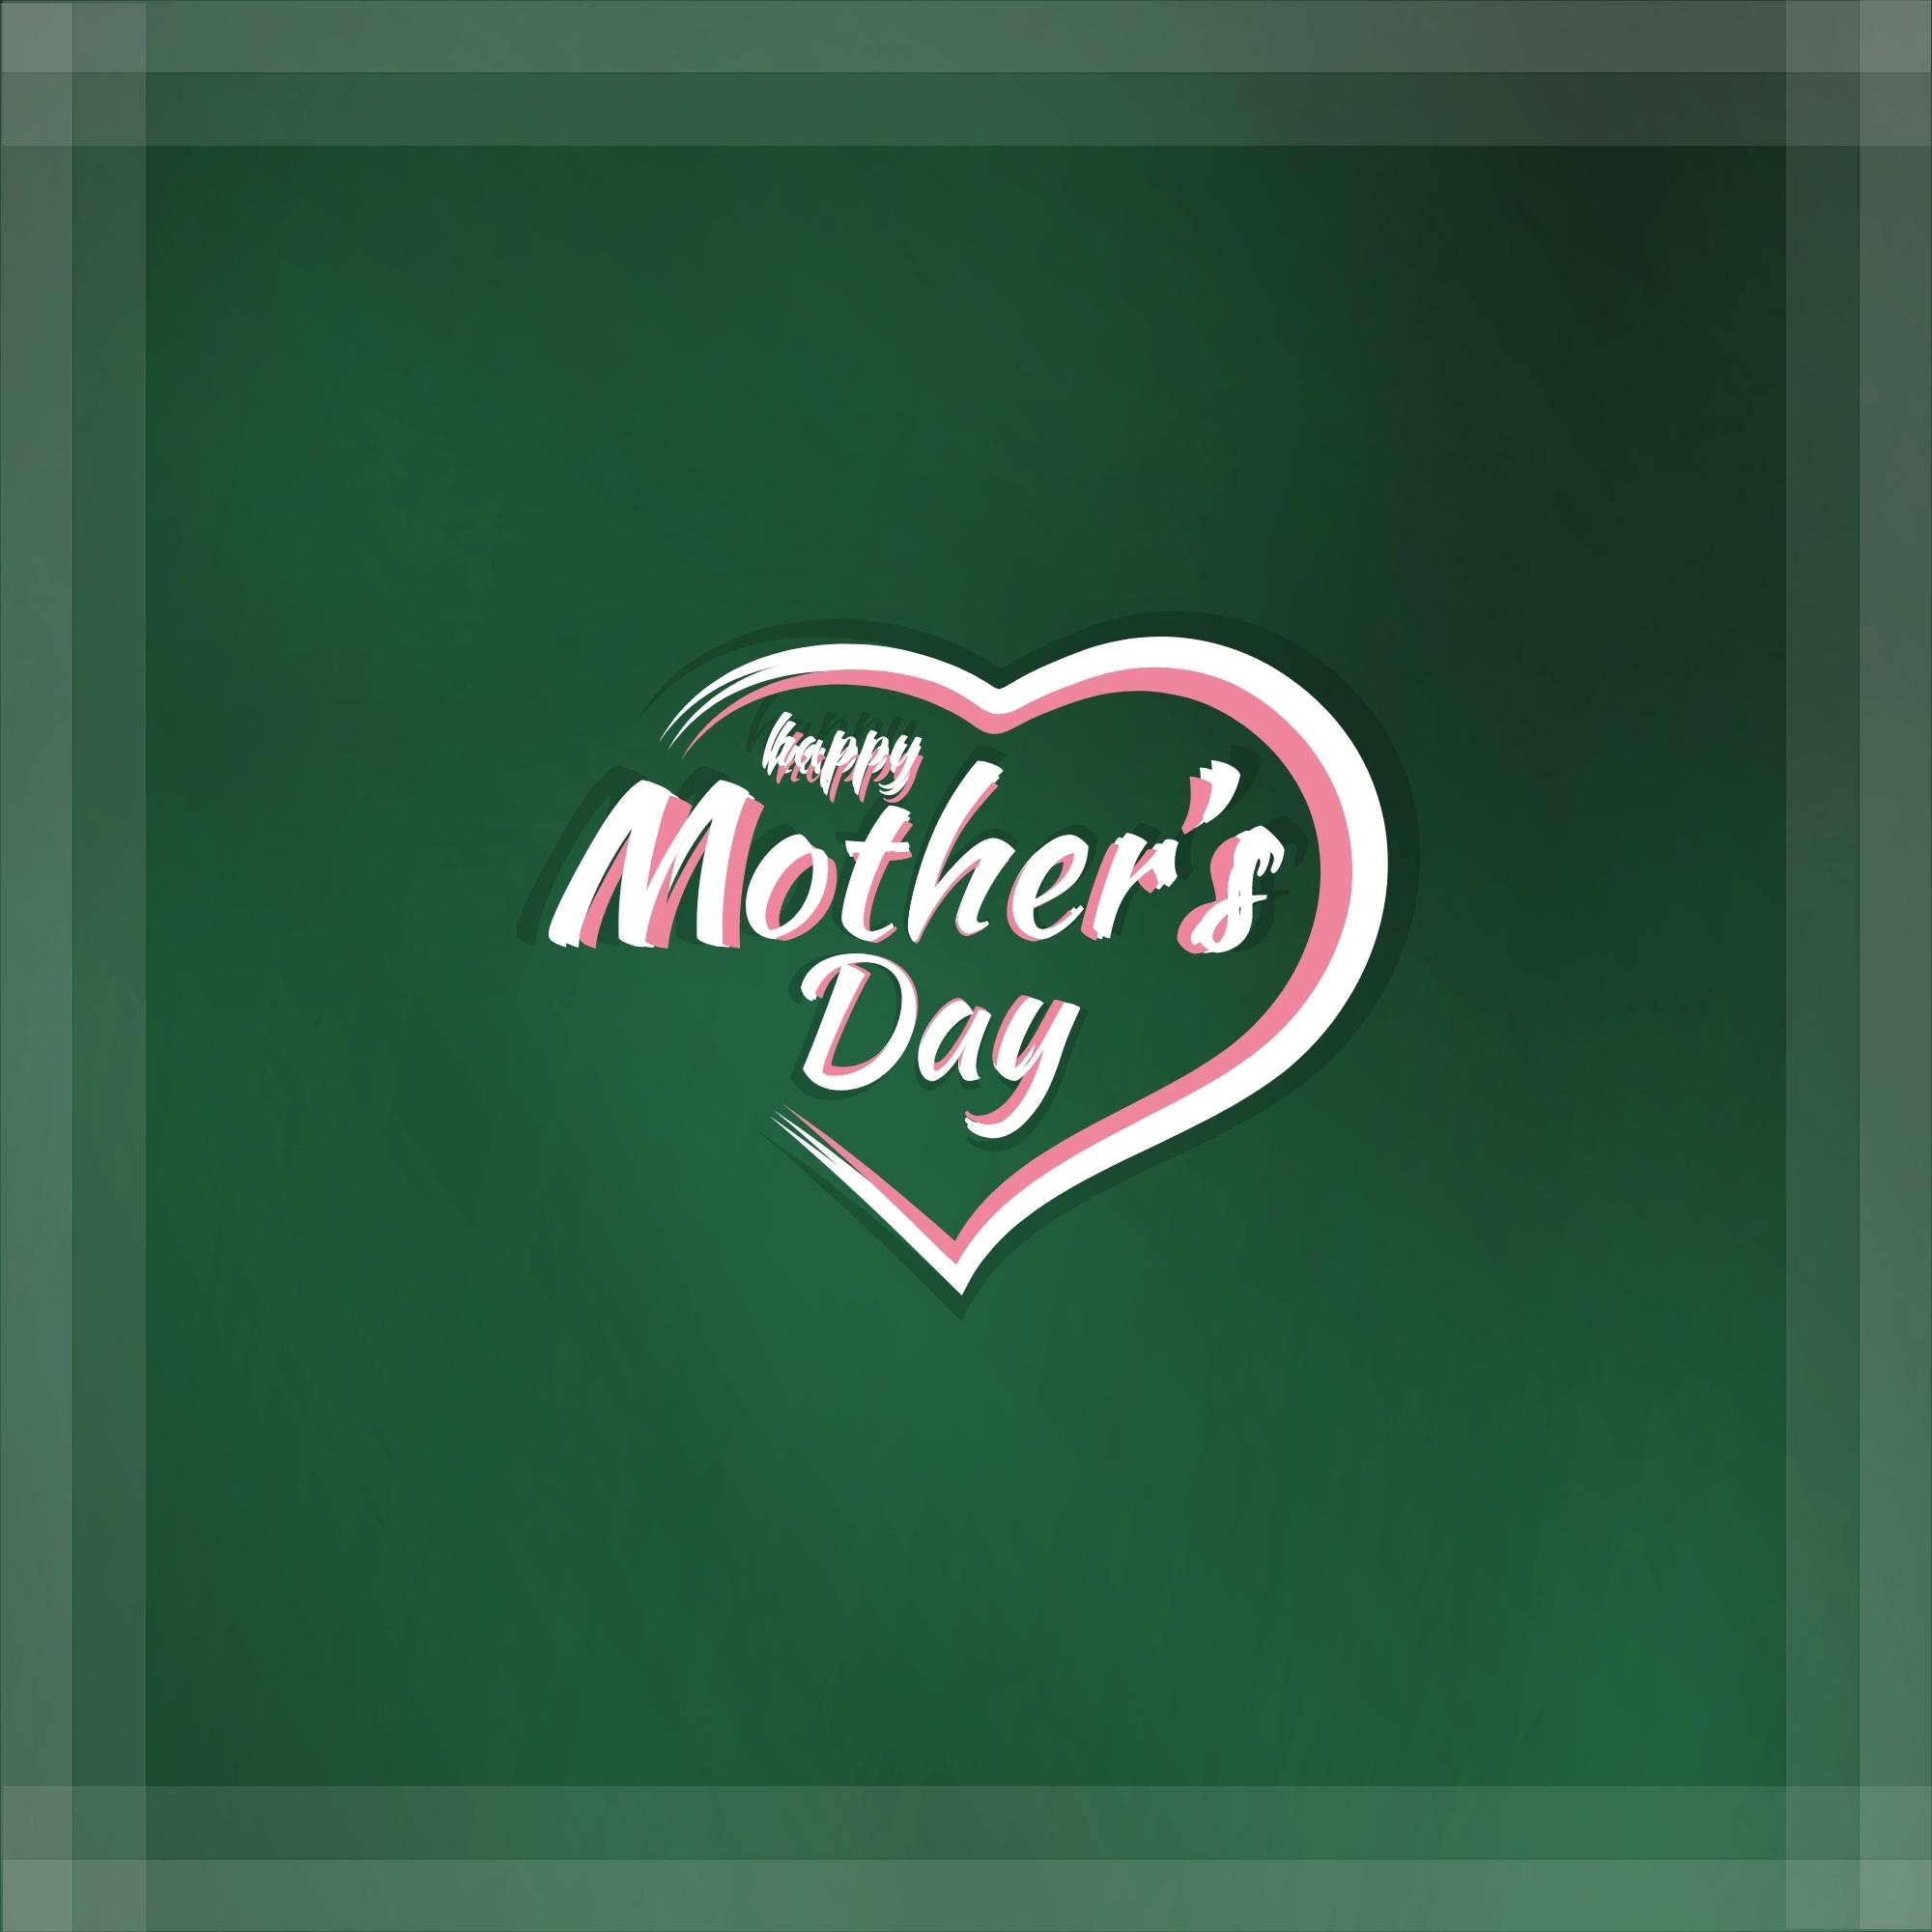 Happy Mothers Day Images | 998 | Free Download [8k,4k,Hd]